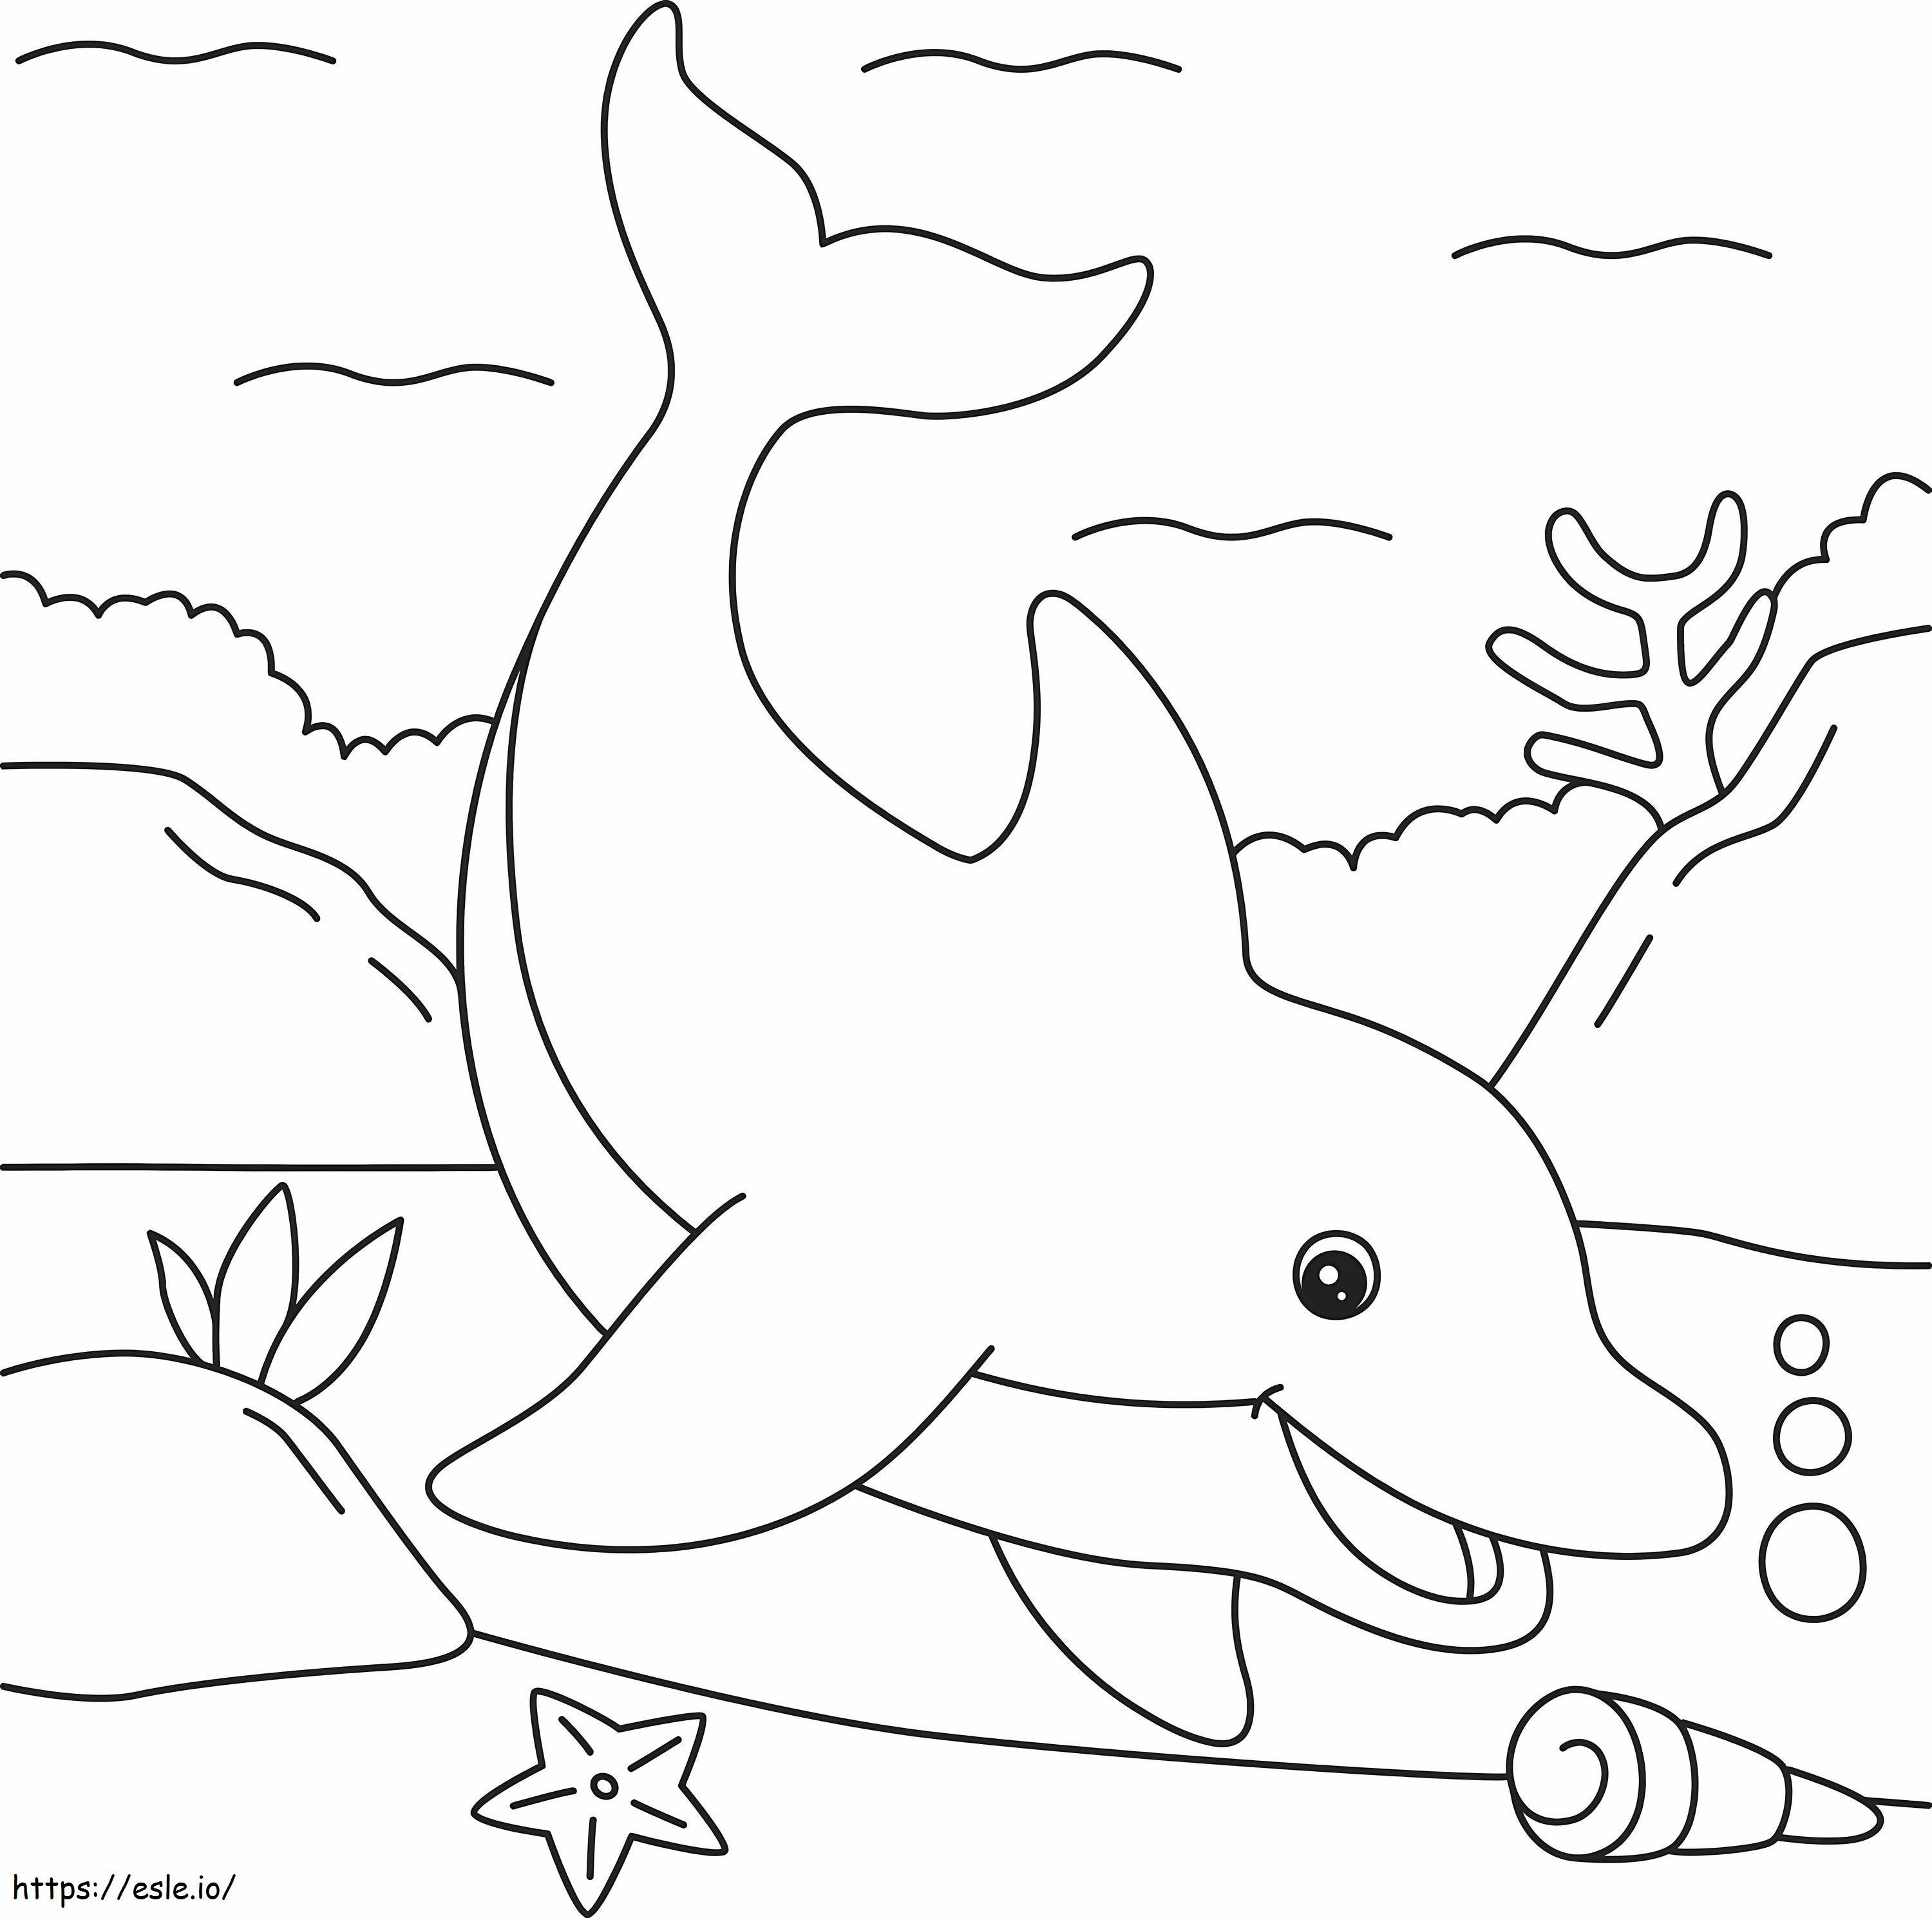 Dolphin In The Sea coloring page